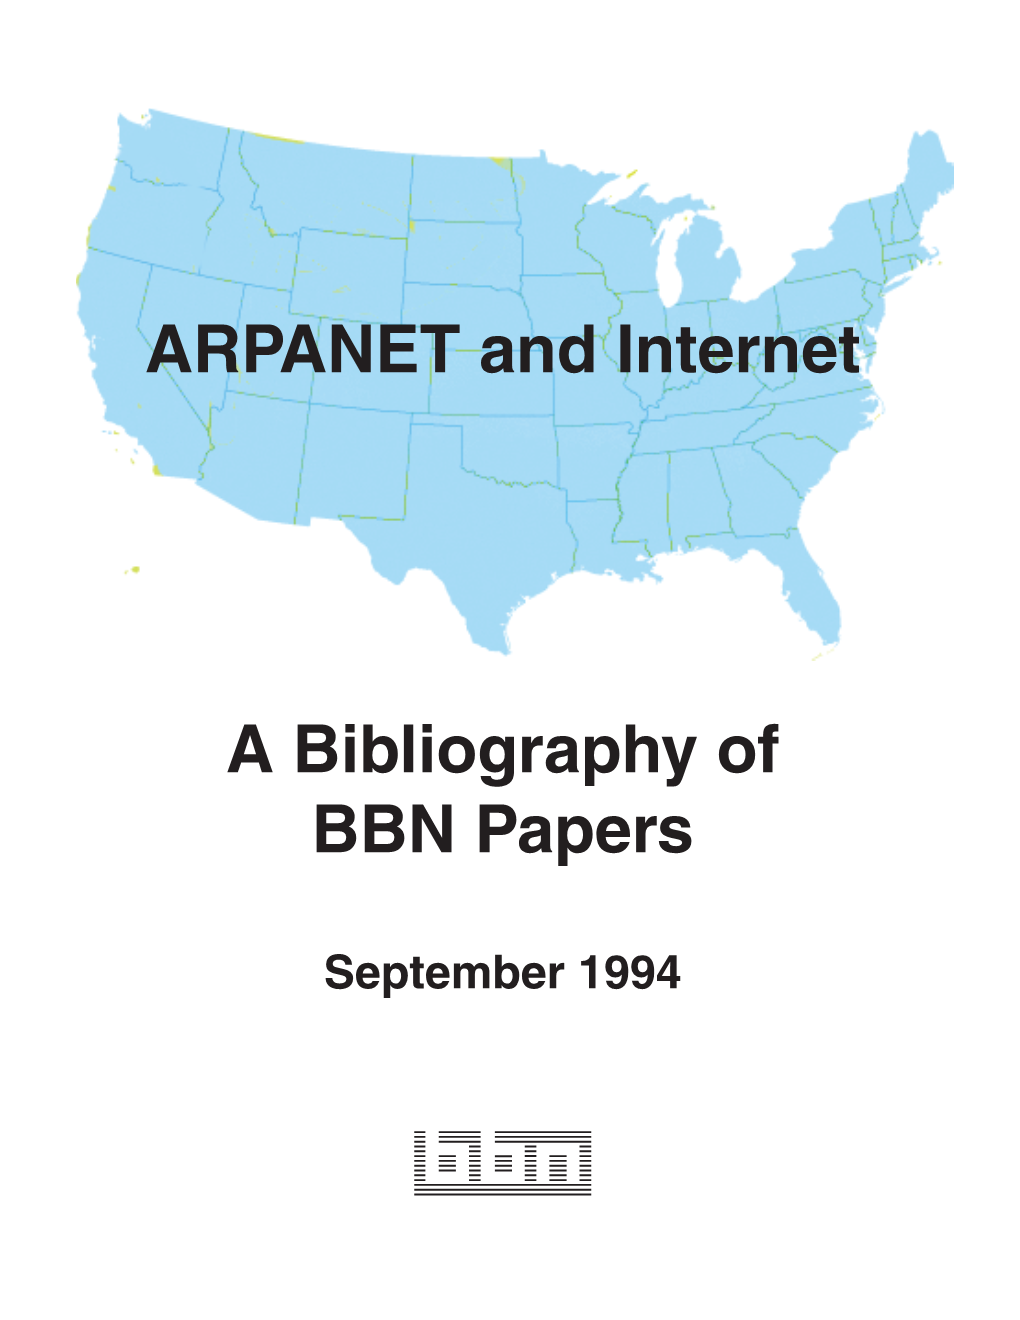 ARPANET and Internet a Bibliography of BBN Papers